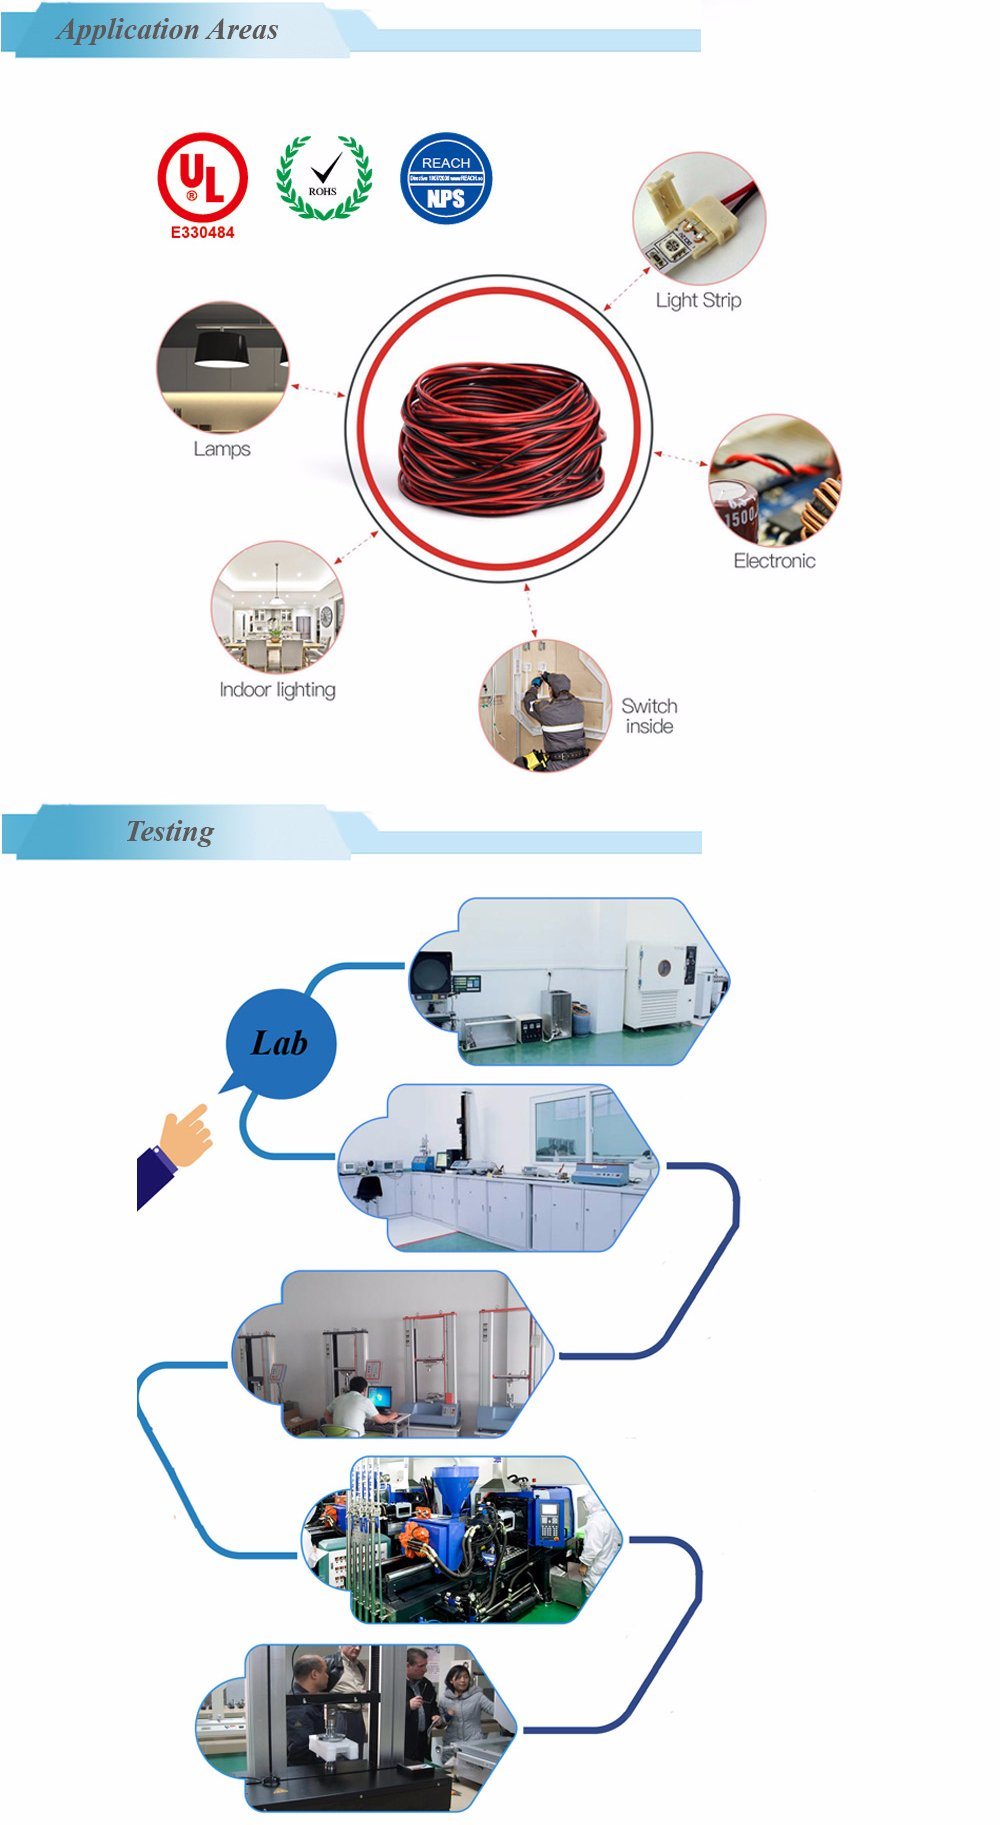 UL, Solid or Stranded, 600V UL3321 XLPE Insualtion Fire Resistant Building, Wire, Electrical Cable, , RoHS, LED Lighting, Audio Cable, Automotive Wire Harness